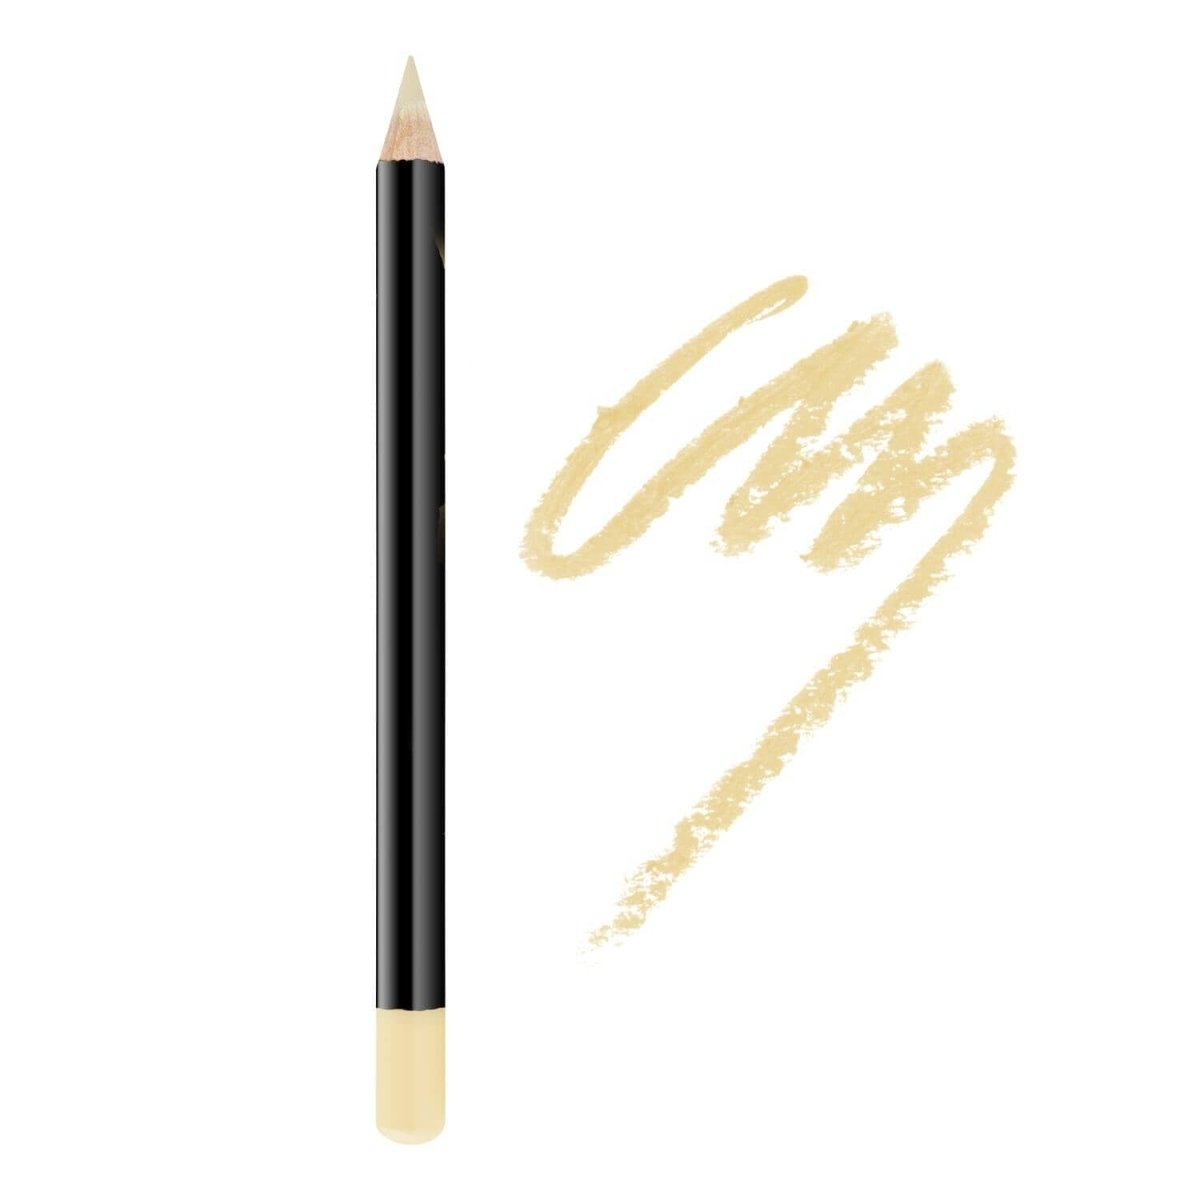 A yellow vegan eyeliner pencil on a White canvas